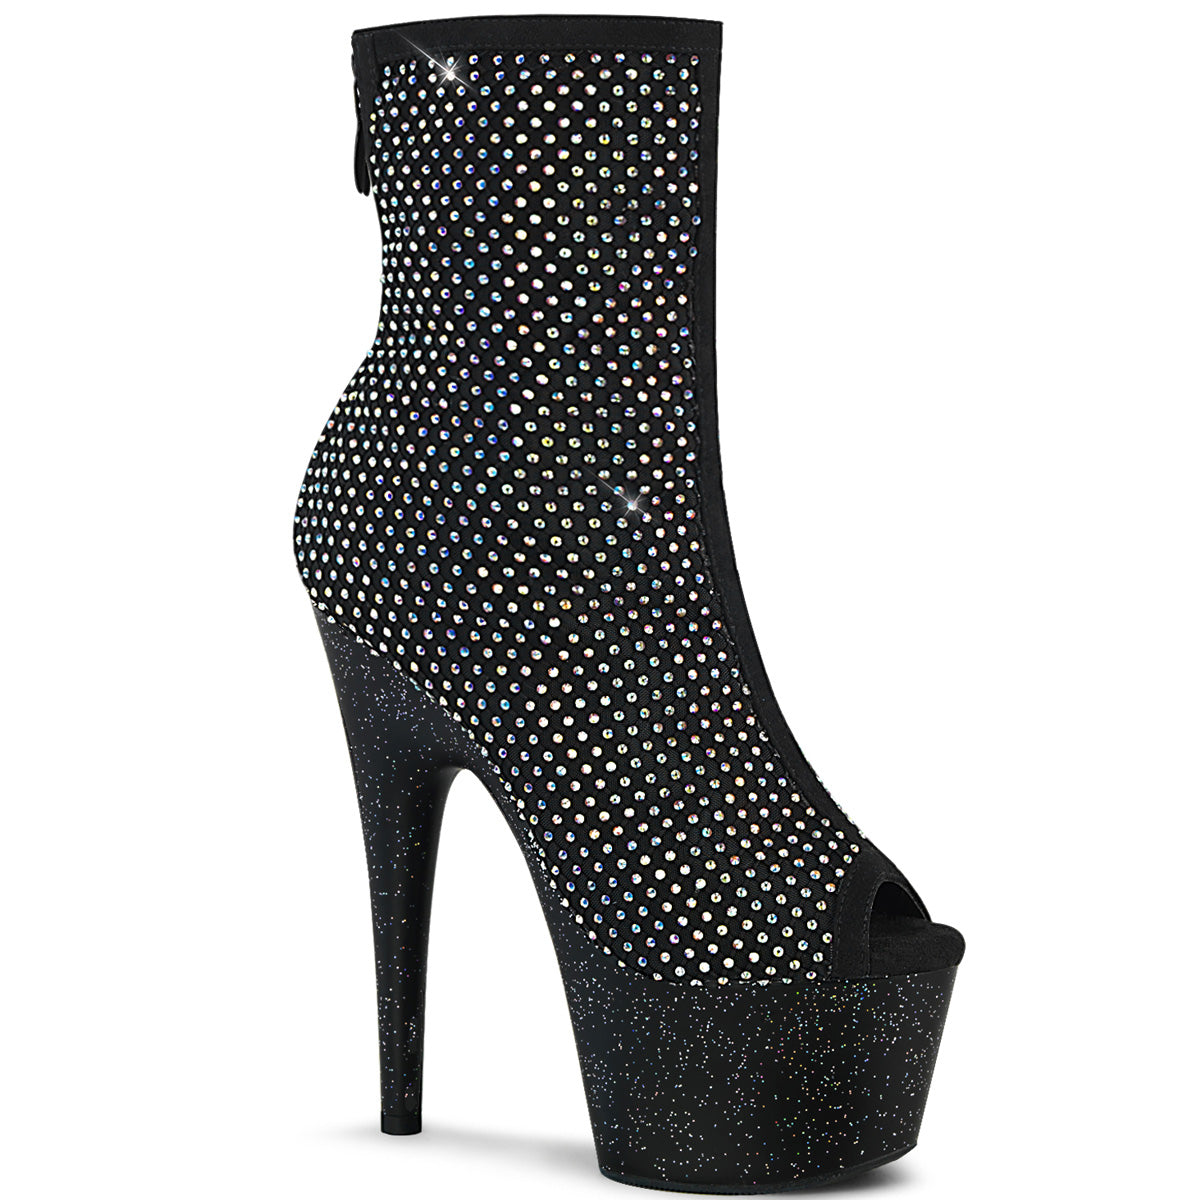 ADORE-1031GM Pleasers Bling Exotic Dancing Glitter Platform Ankle Boots